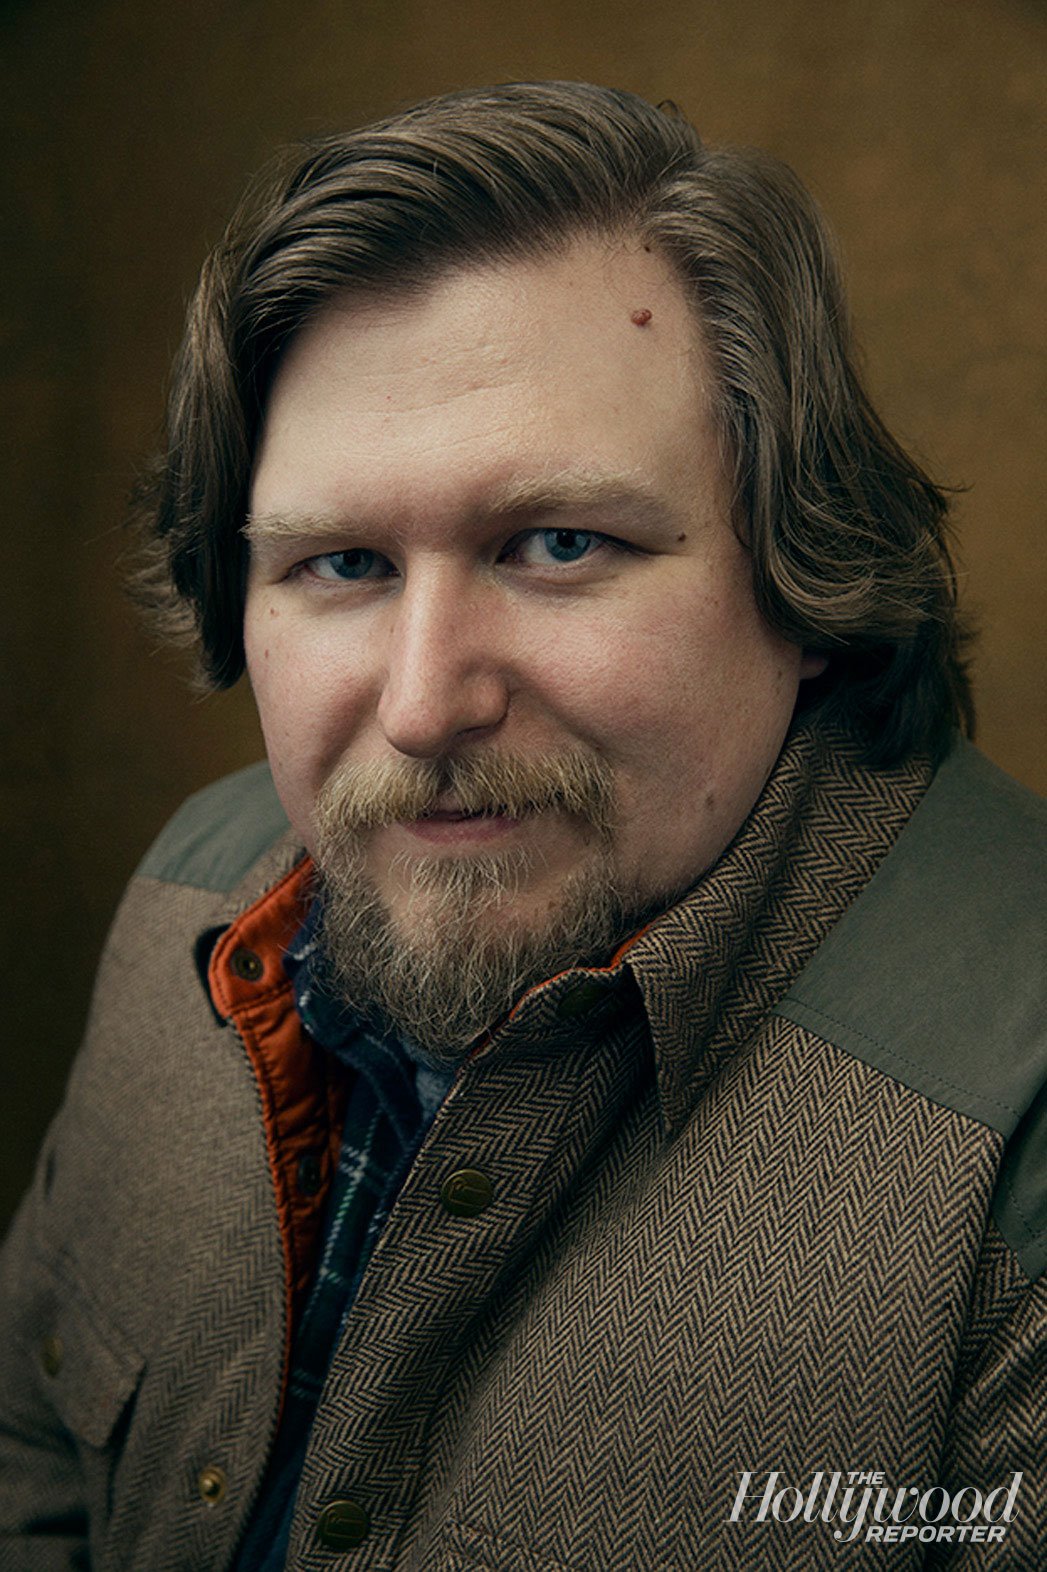 Michael Chernus at The Hollywood Reporter photobooth at the 2015 Sundance Film Festival in Park City on Jan. 26, 2015.